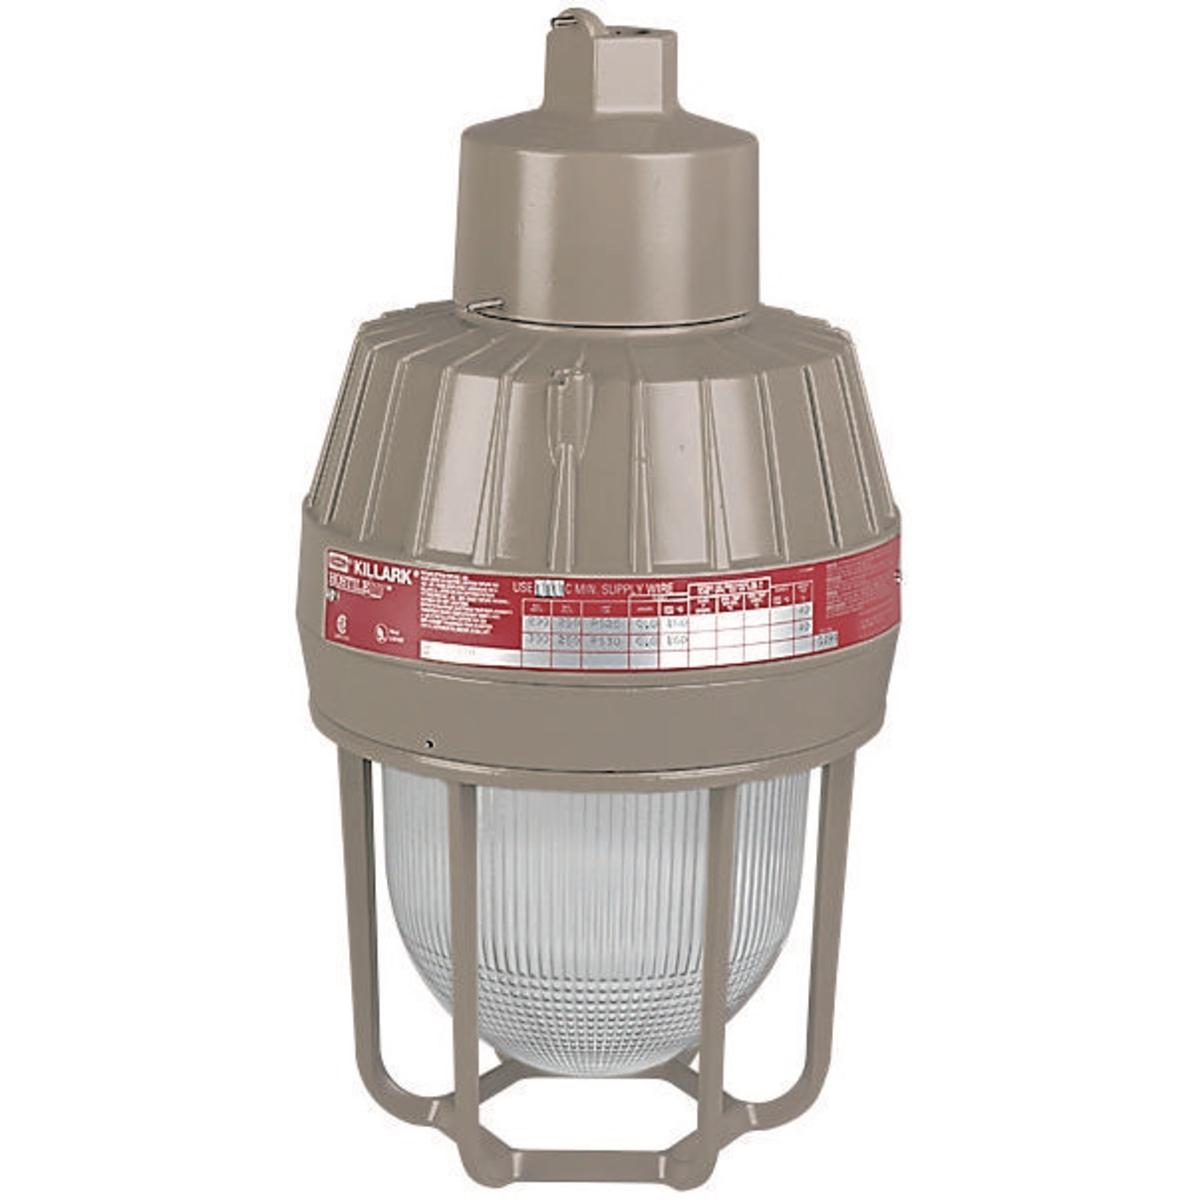 Hubbell EMS075A2G EM 70W 480V HPS 3/4" Pendant/ with Guard  ; Four light sources—Incandescent, compact fluorescent, high pressure sodium and metal halide ; Mounting choice—Pendant, ceiling, 25˚ stanchion or 90˚ wall mount, all with “wireless” design that allows fast, easy 